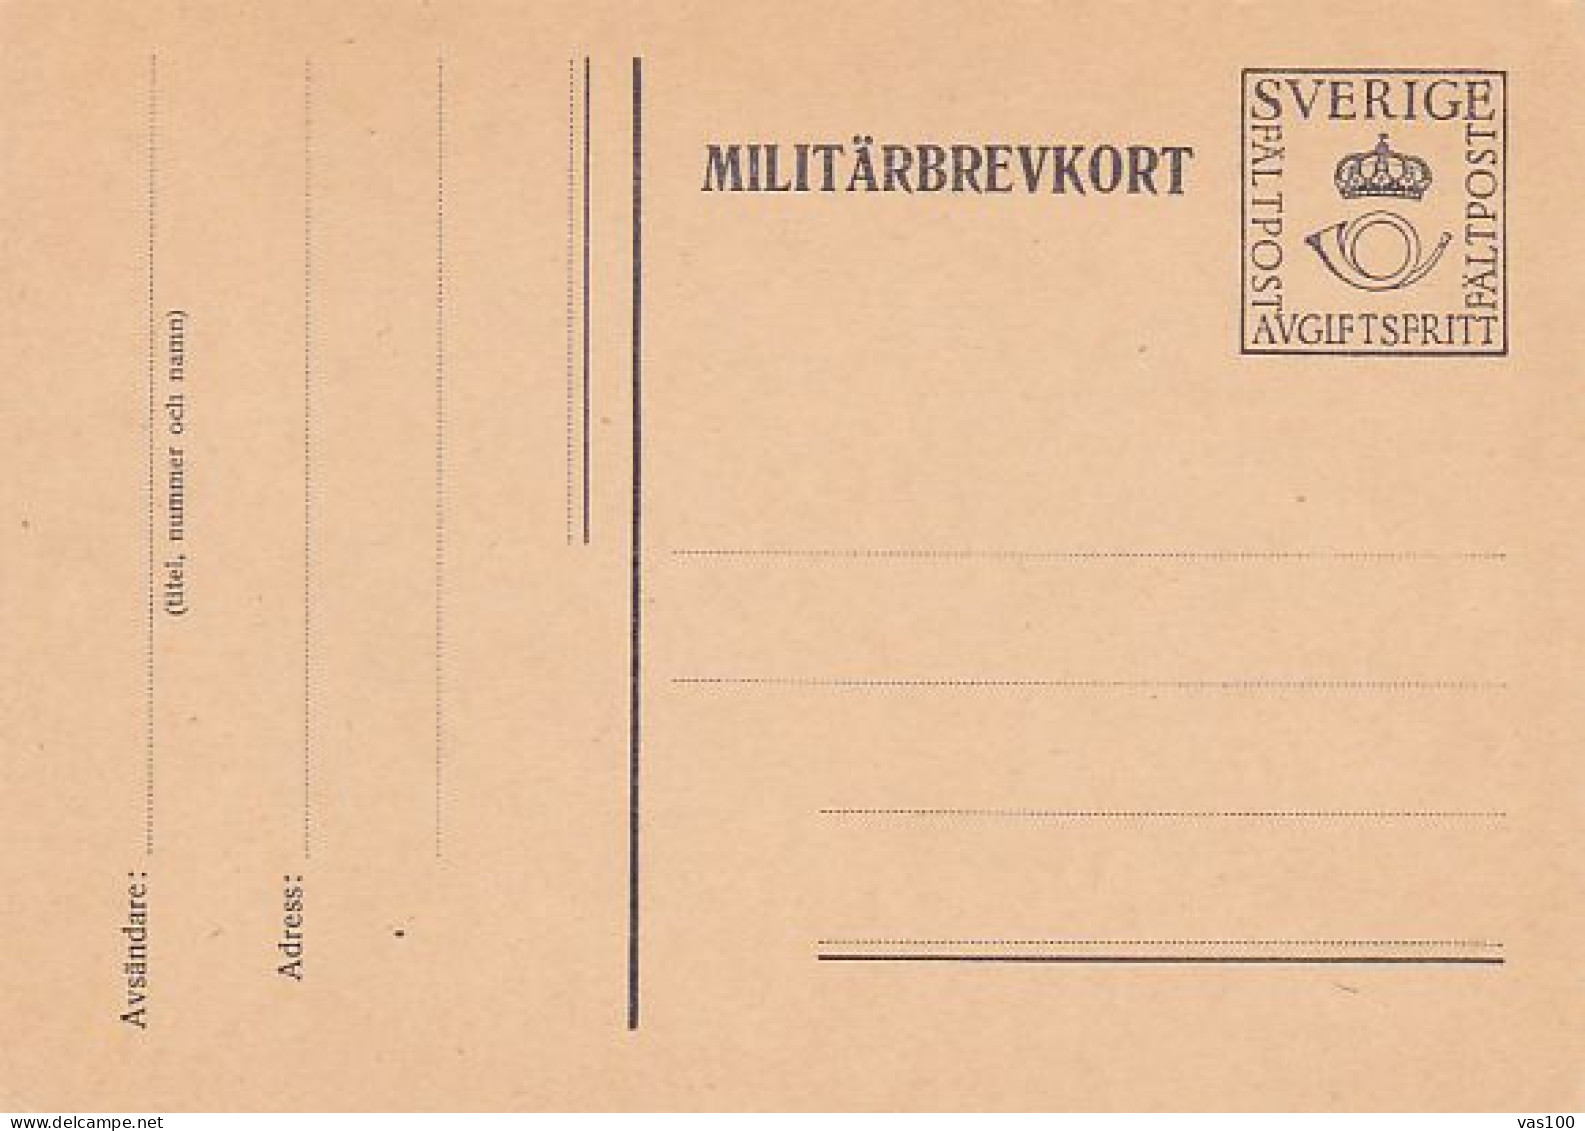 FREE OF CHARGE MILITARY FIELD POST PC STATIONERY, ENTIER POSTAL, UNUSED, SWEDEN - Militärmarken